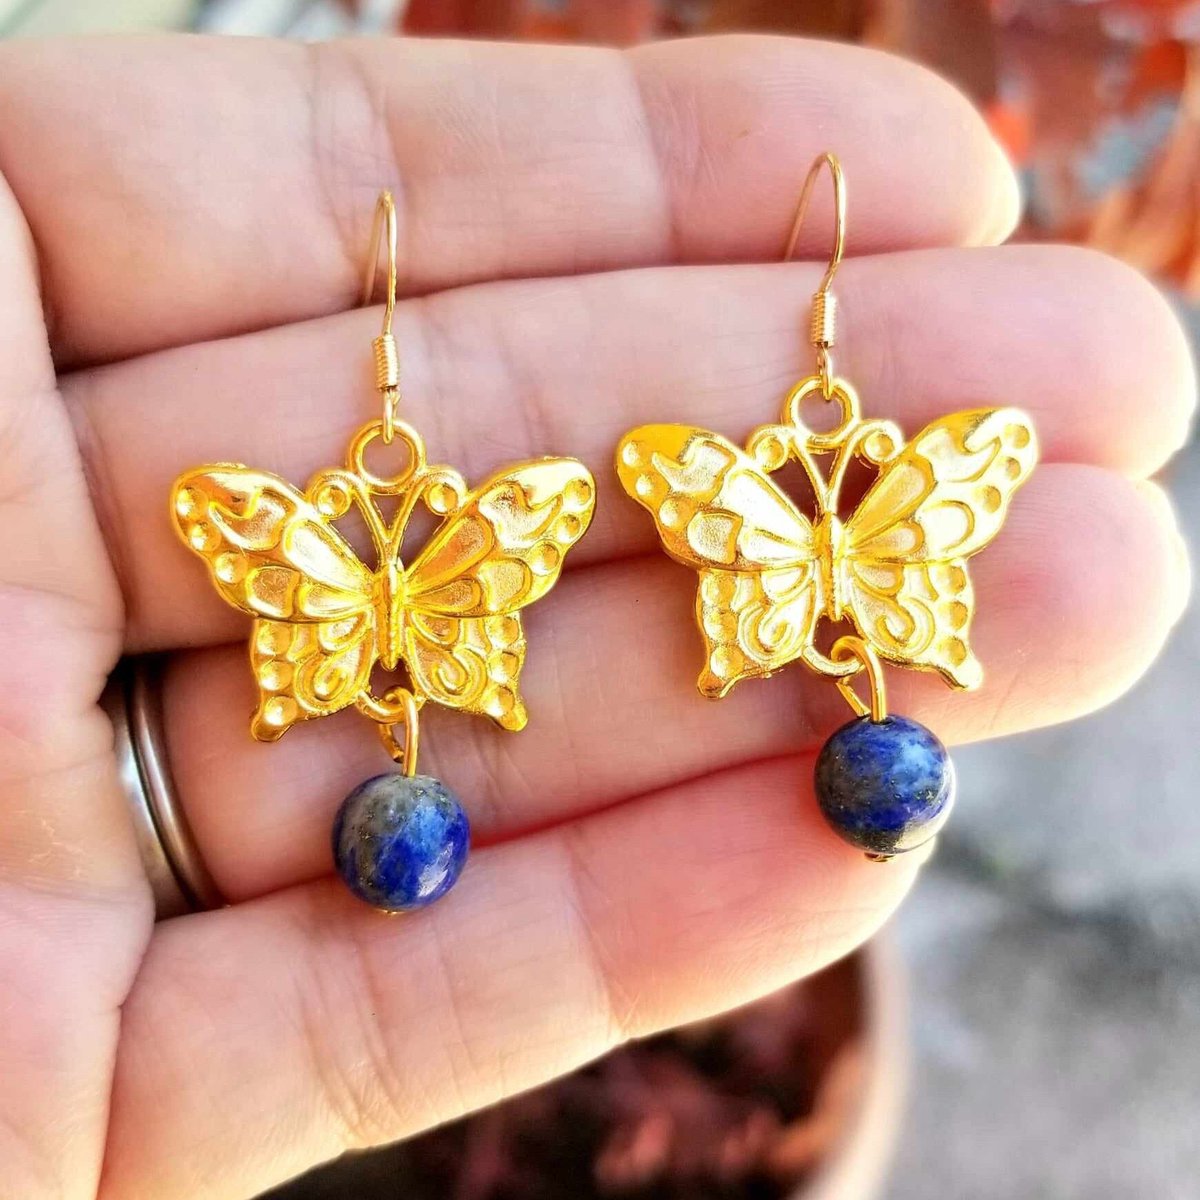 Gold Lapis Butterfly Earrings 

#jewelry #earrings #fashion #style #womensfashion #womenstyle #handmade #handmadejewelry #handmadegift #giftsforher #mothersday #mothersdaygifts #graduationgift #etsy #lapis #lapisearrings #butterfly #butterflyjewelry 

simplychicbyangela.etsy.com/listing/158474…